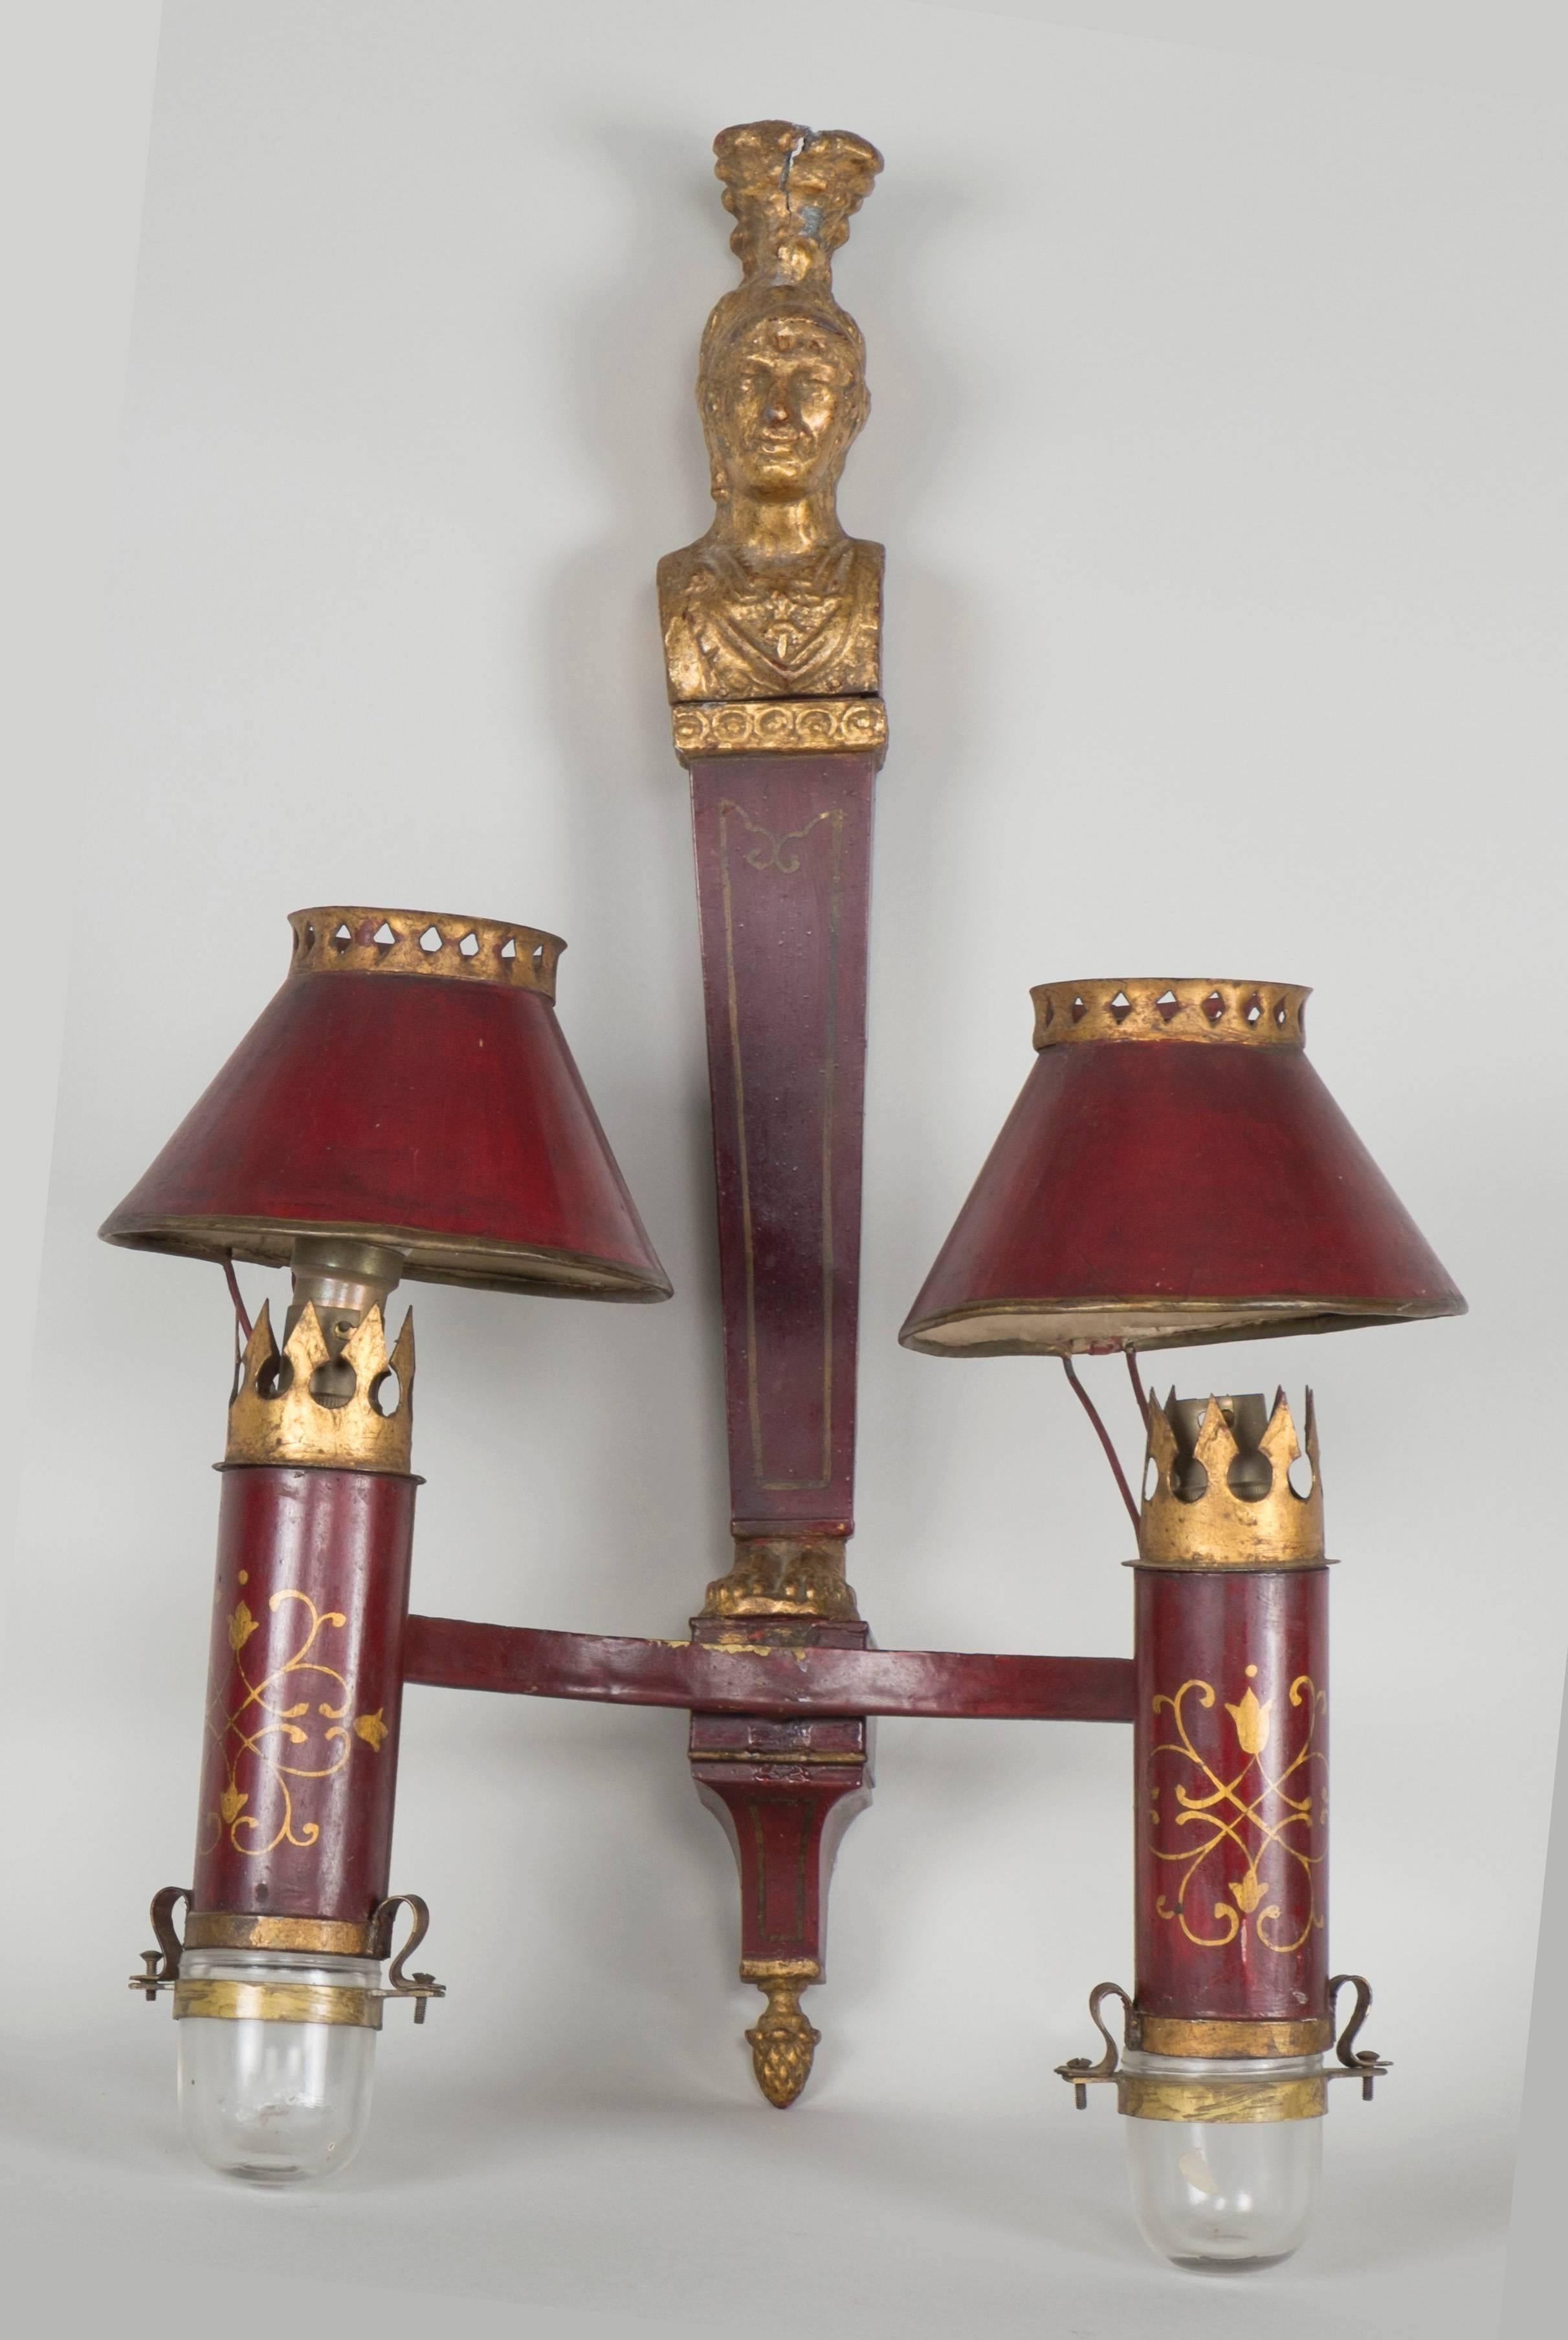 Set of three red sheet metals sconces depicting removable heads of caryatids.

Work from the beginning of the 19th century.

Dimensions:

55 cm H x 35 cm L.